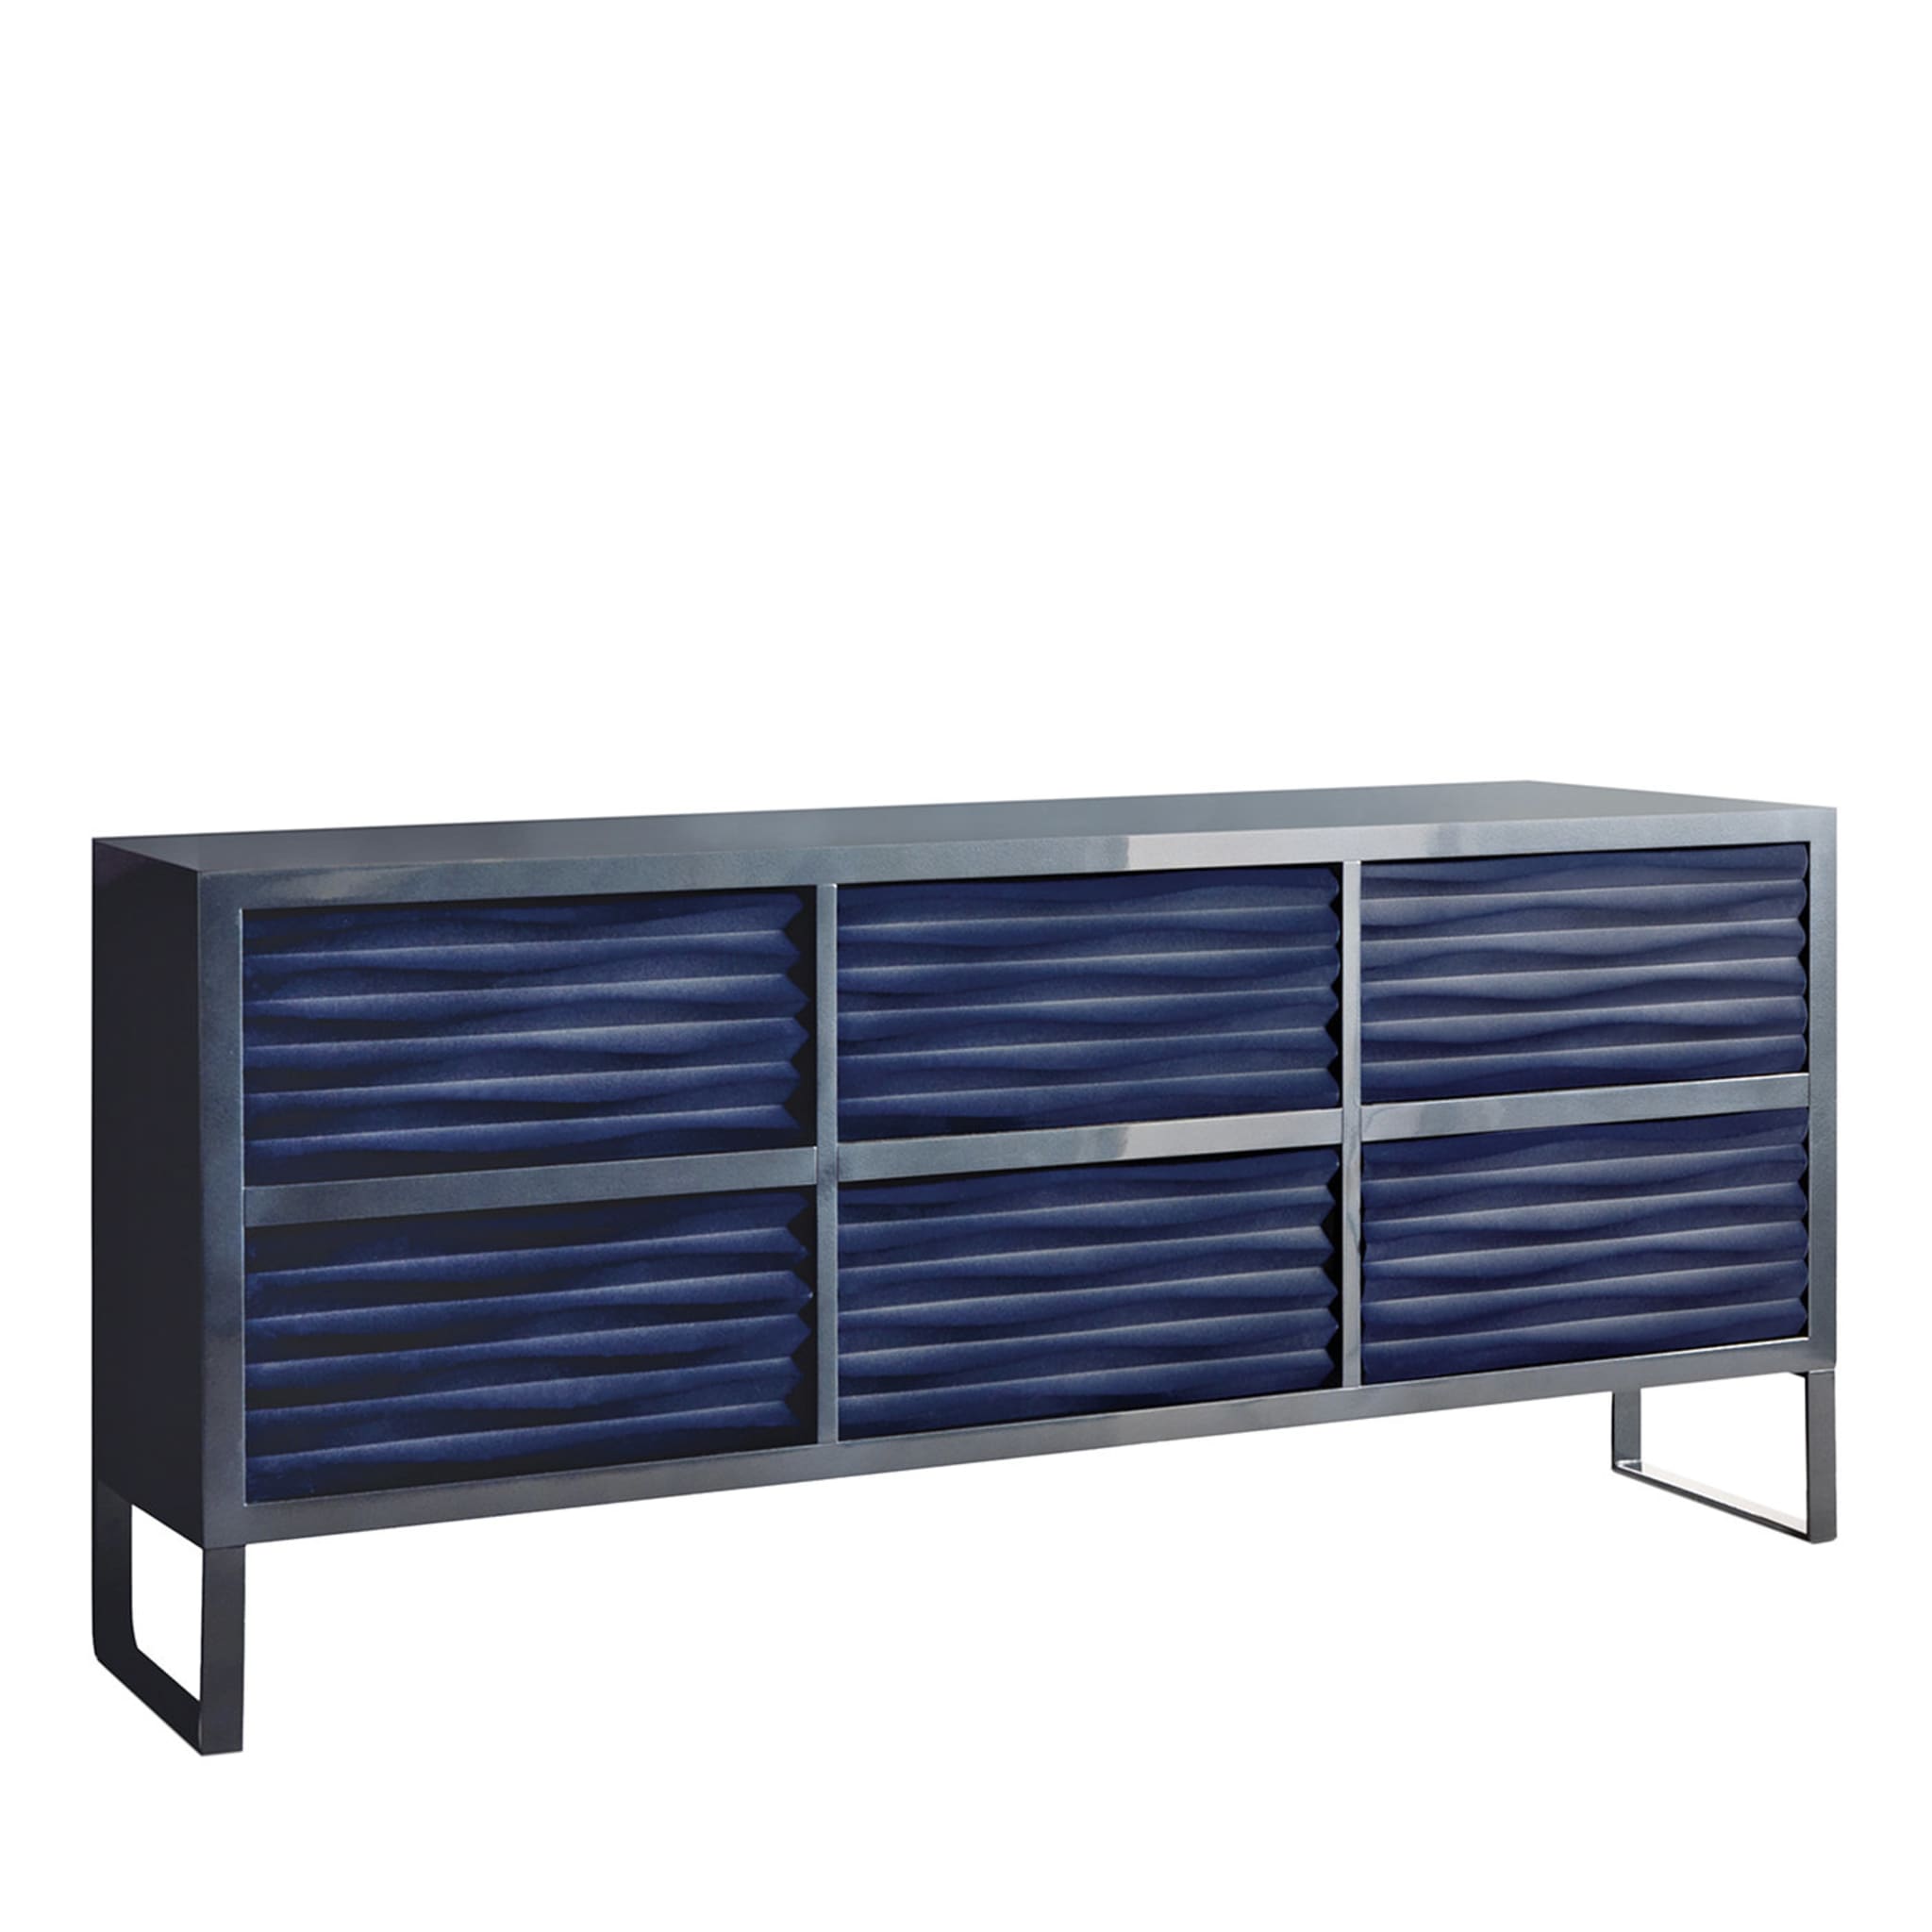 Ebon II Blue Chest Of Drawers - Main view